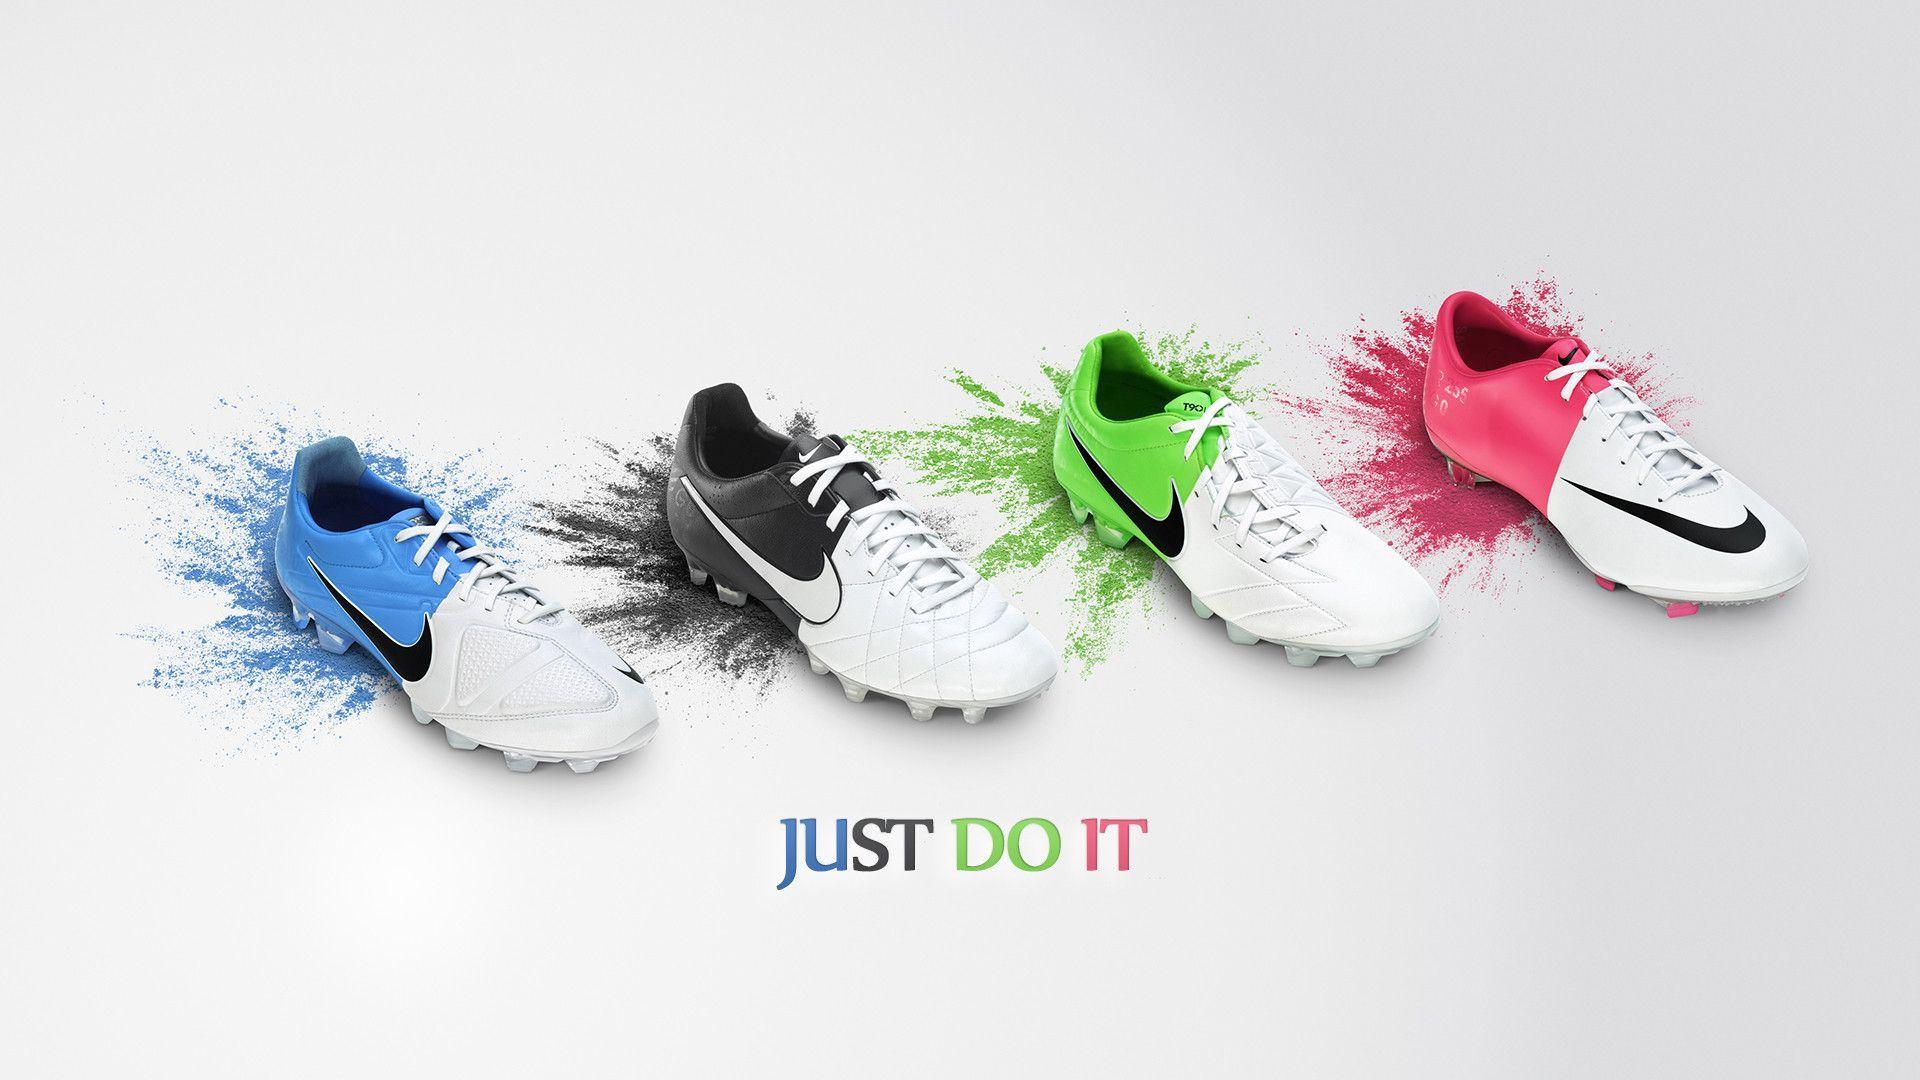 Nike HD Wallpaper. Paperwal of High Quality Sporty